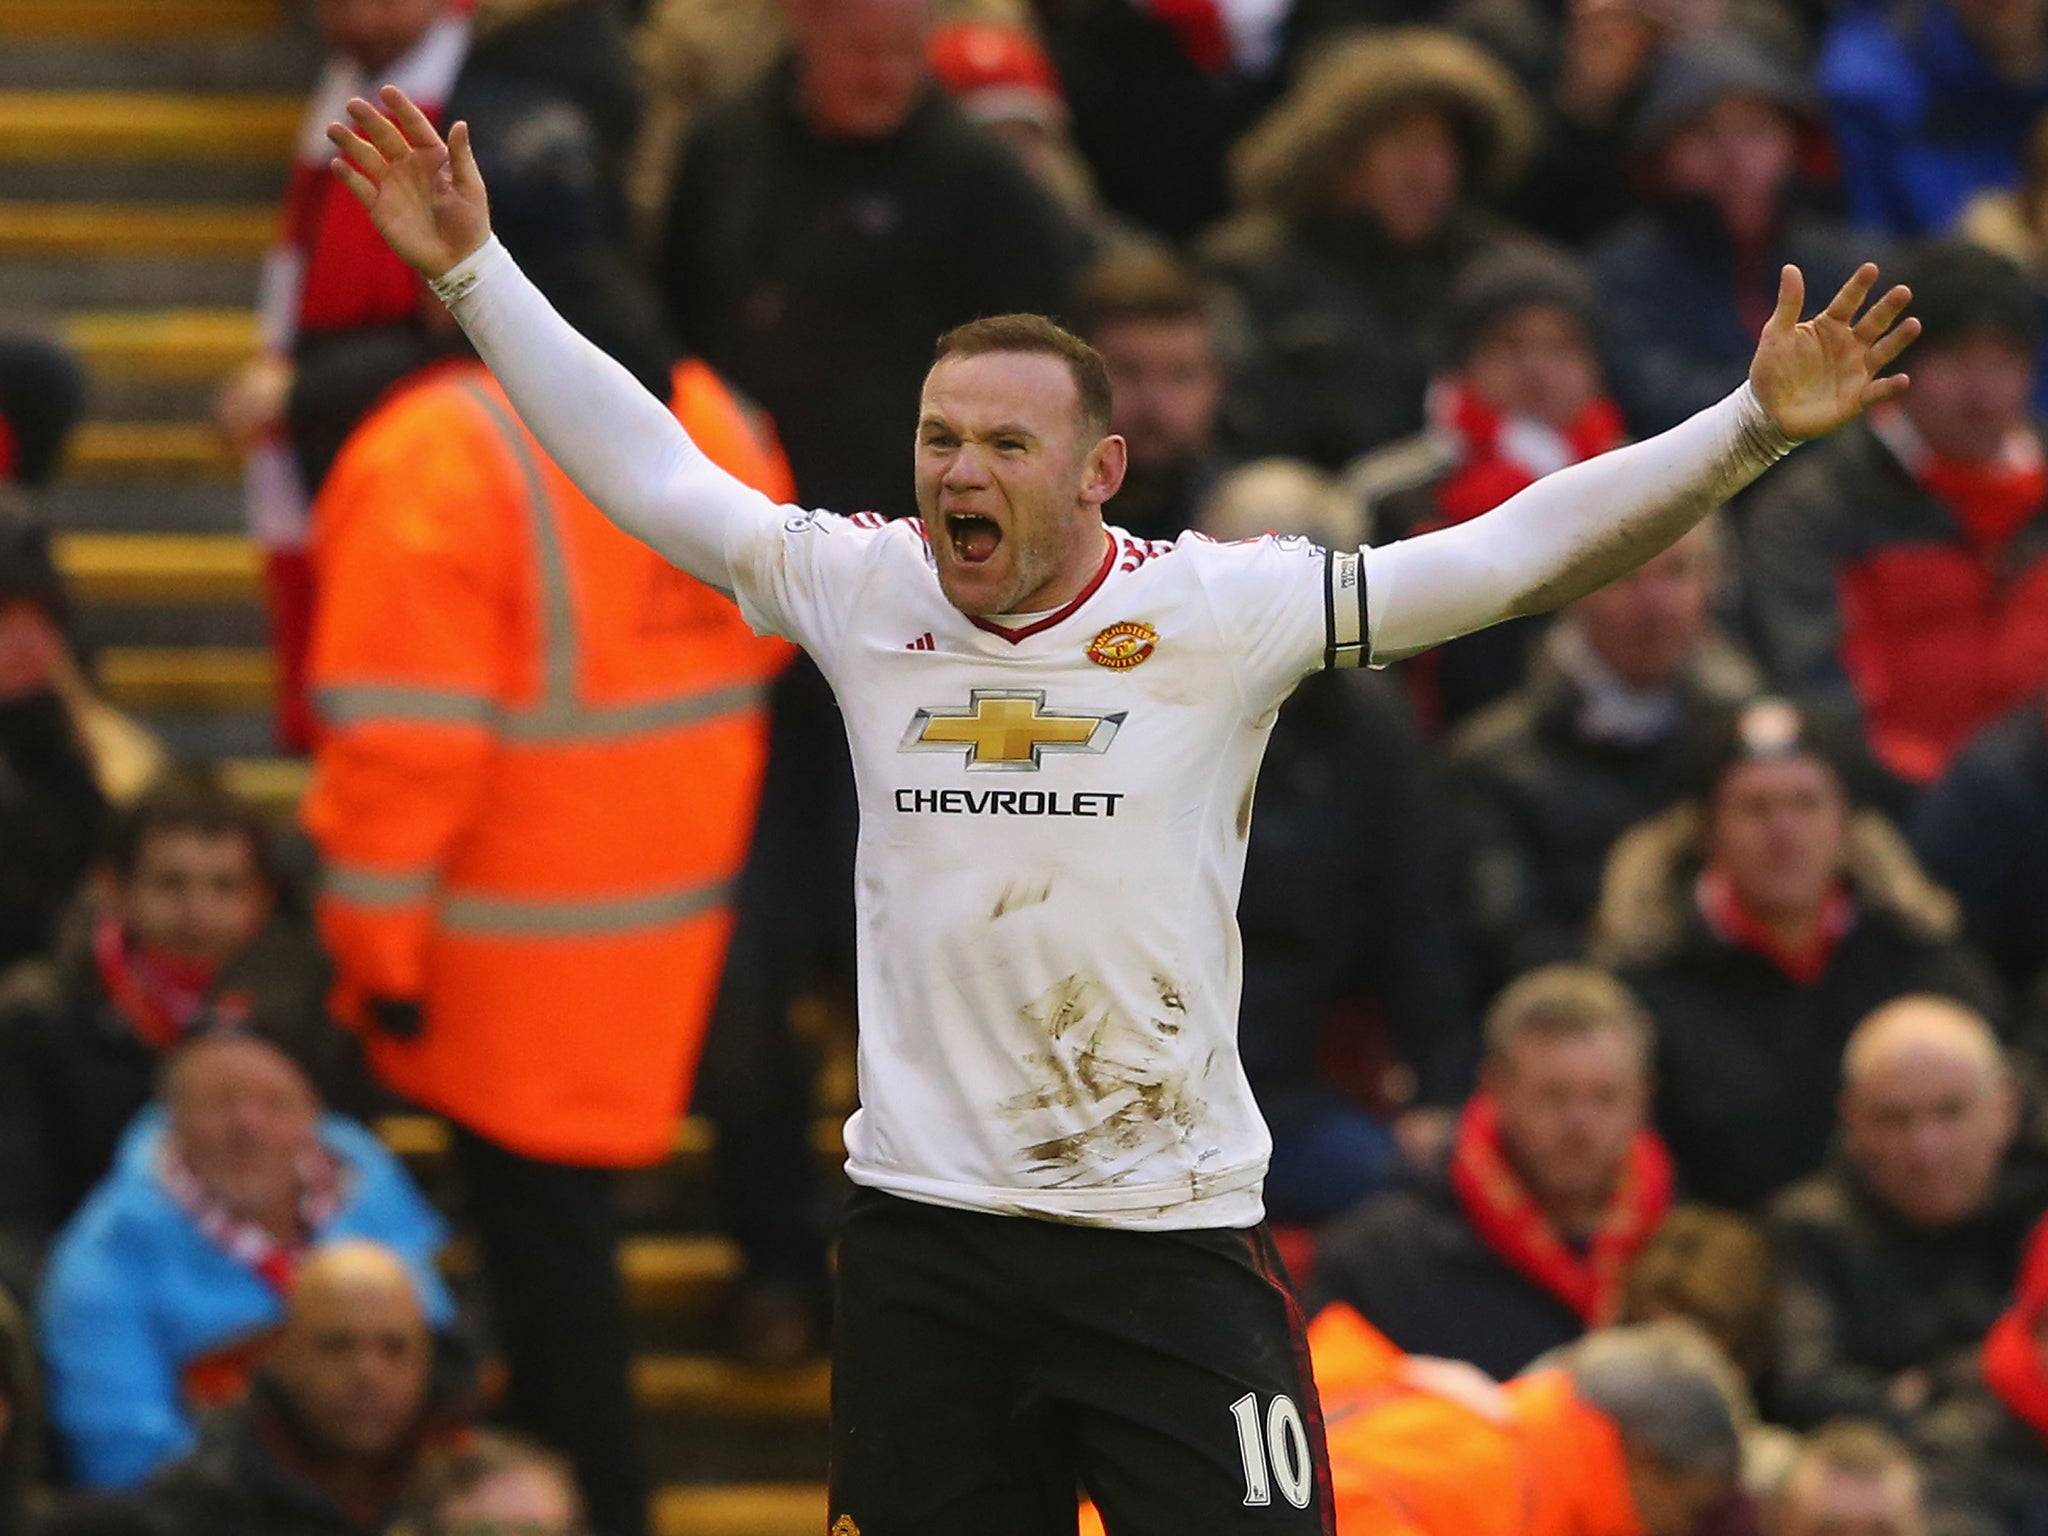 Wayne Rooney starts in an experienced Manchester United side